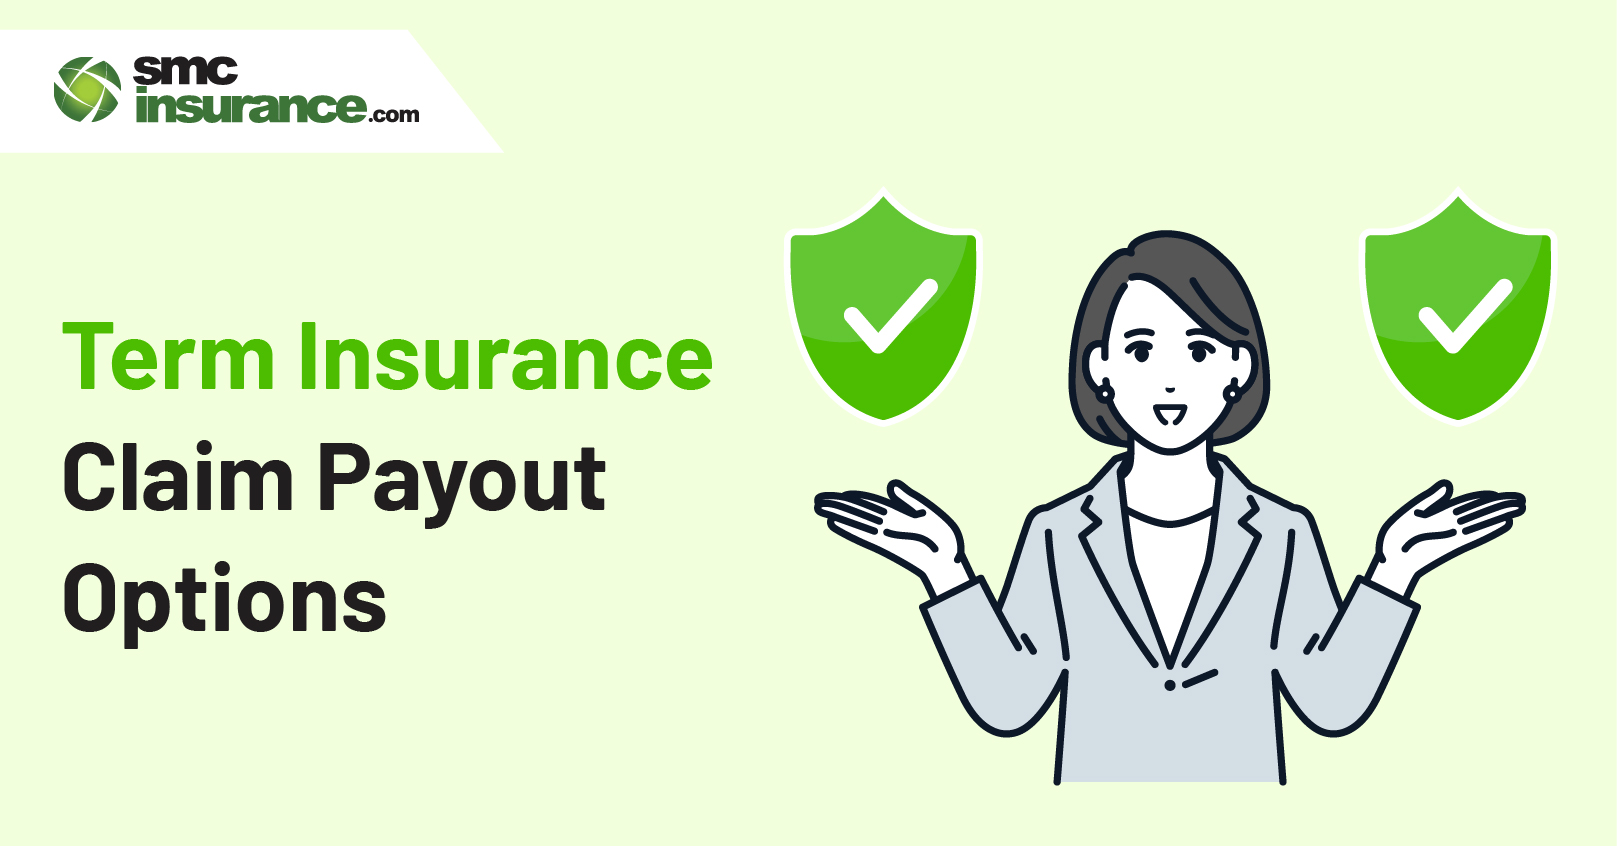 Term Insurance - Claim Payout Options